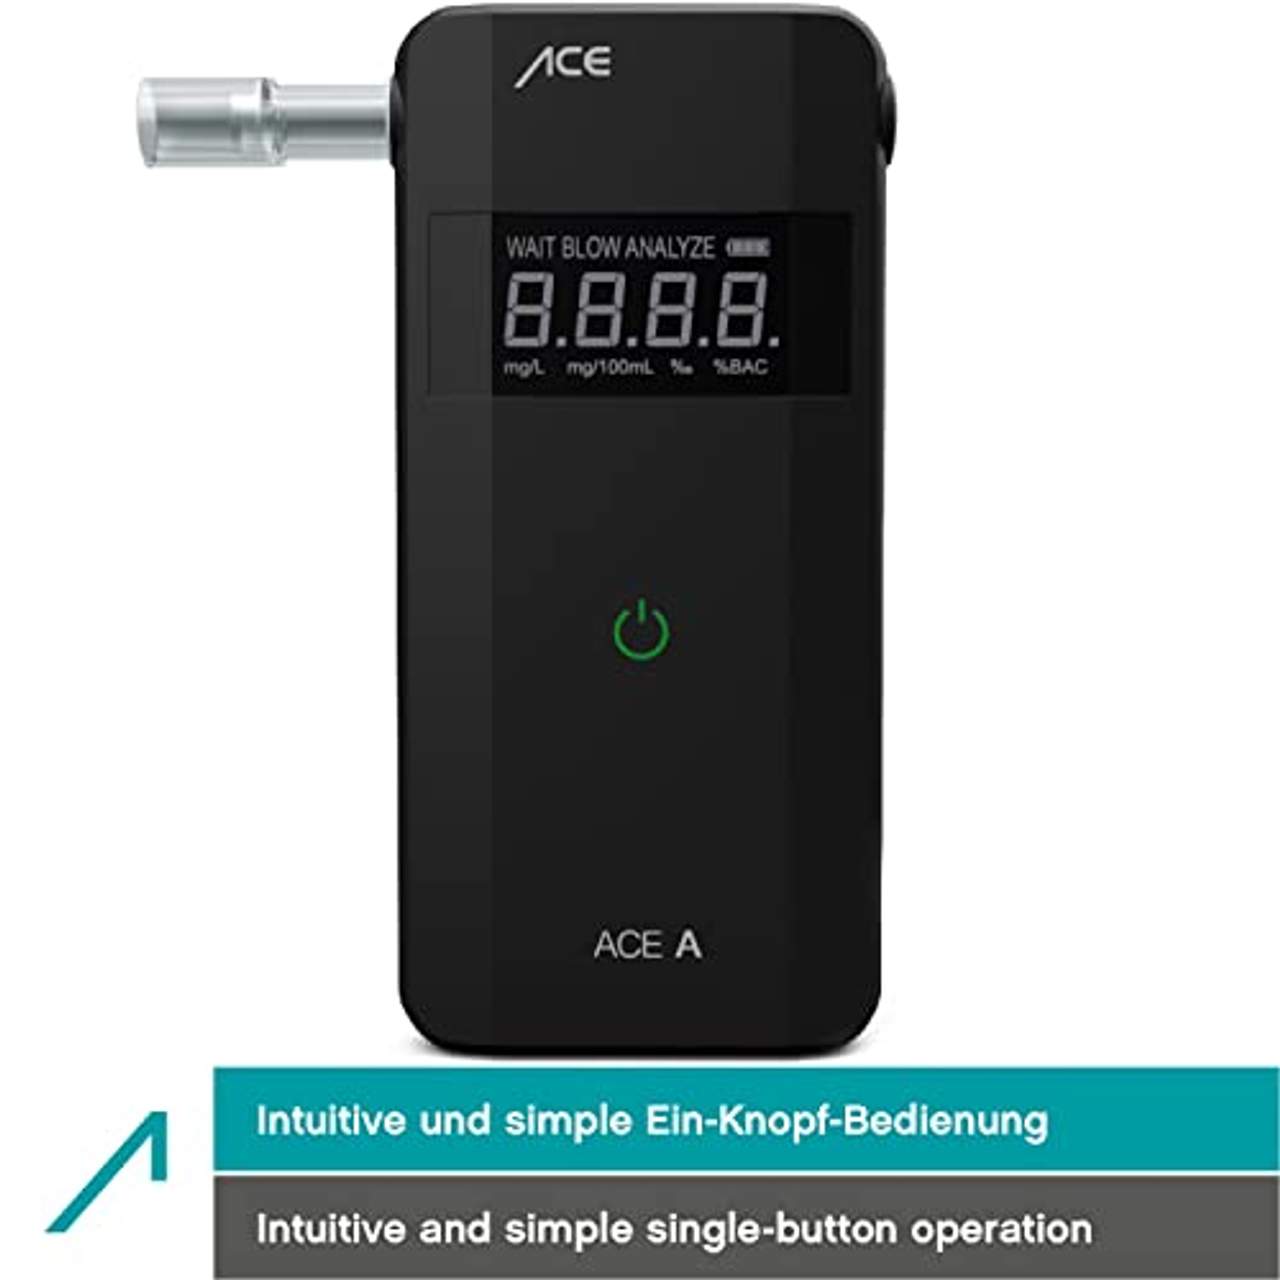 ACE Alkoholtester A Polizeigenauer Promilletester